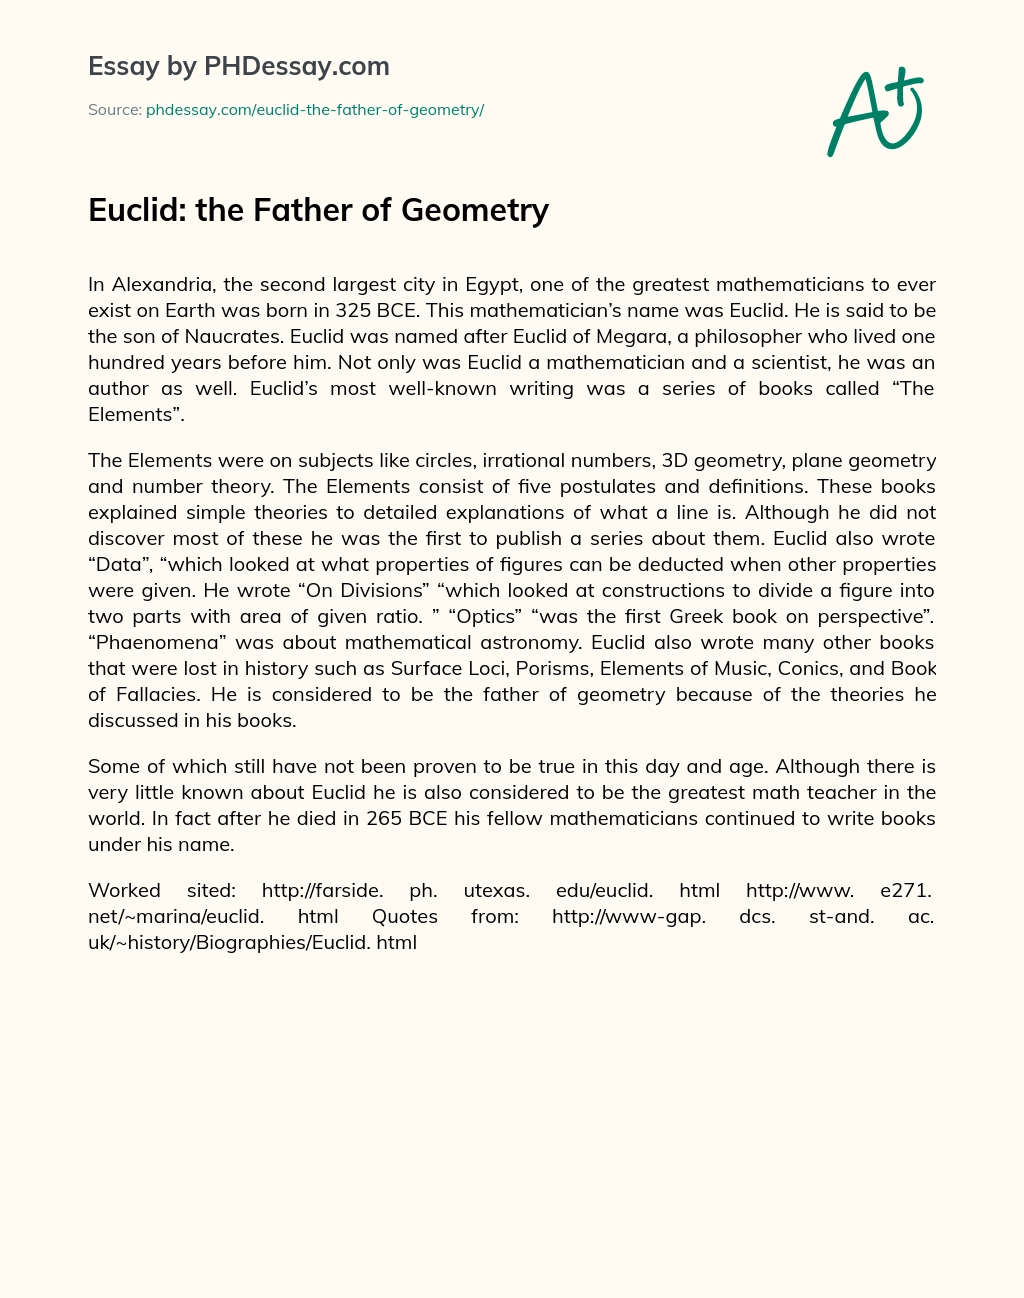 essay on father of geometry